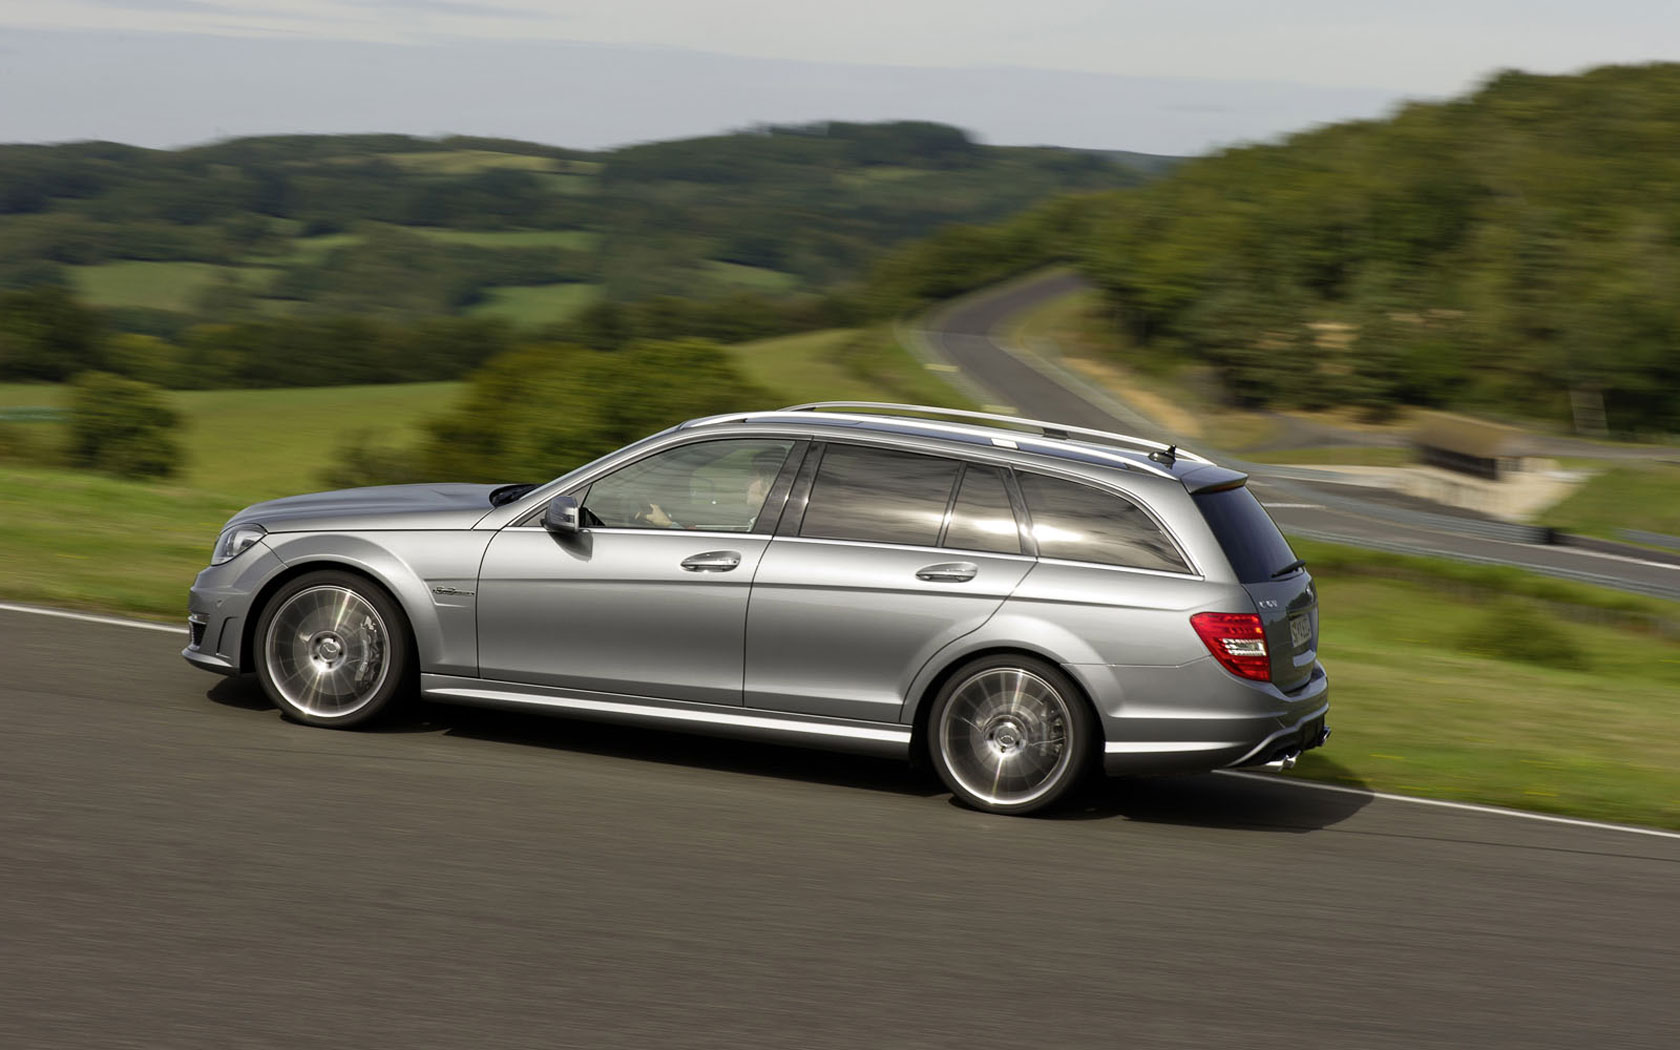  Mercedes C-Class AMG Touring (2011-2013)